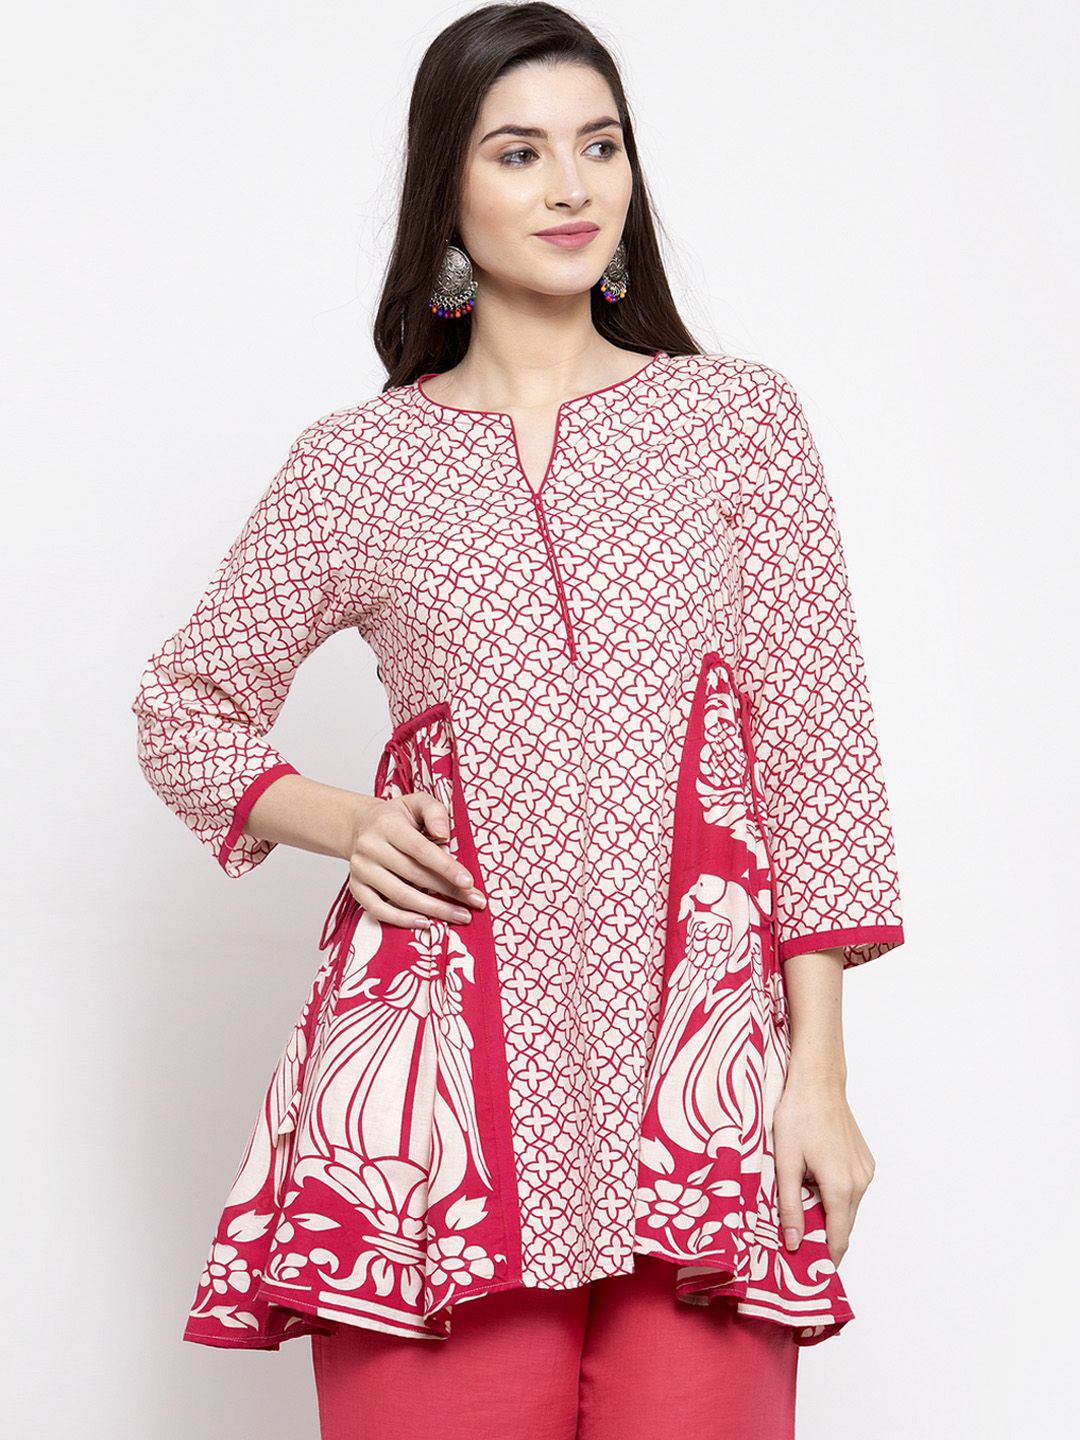 Bhama Couture Women's Off-White & Pink Printed Tunic Price in India